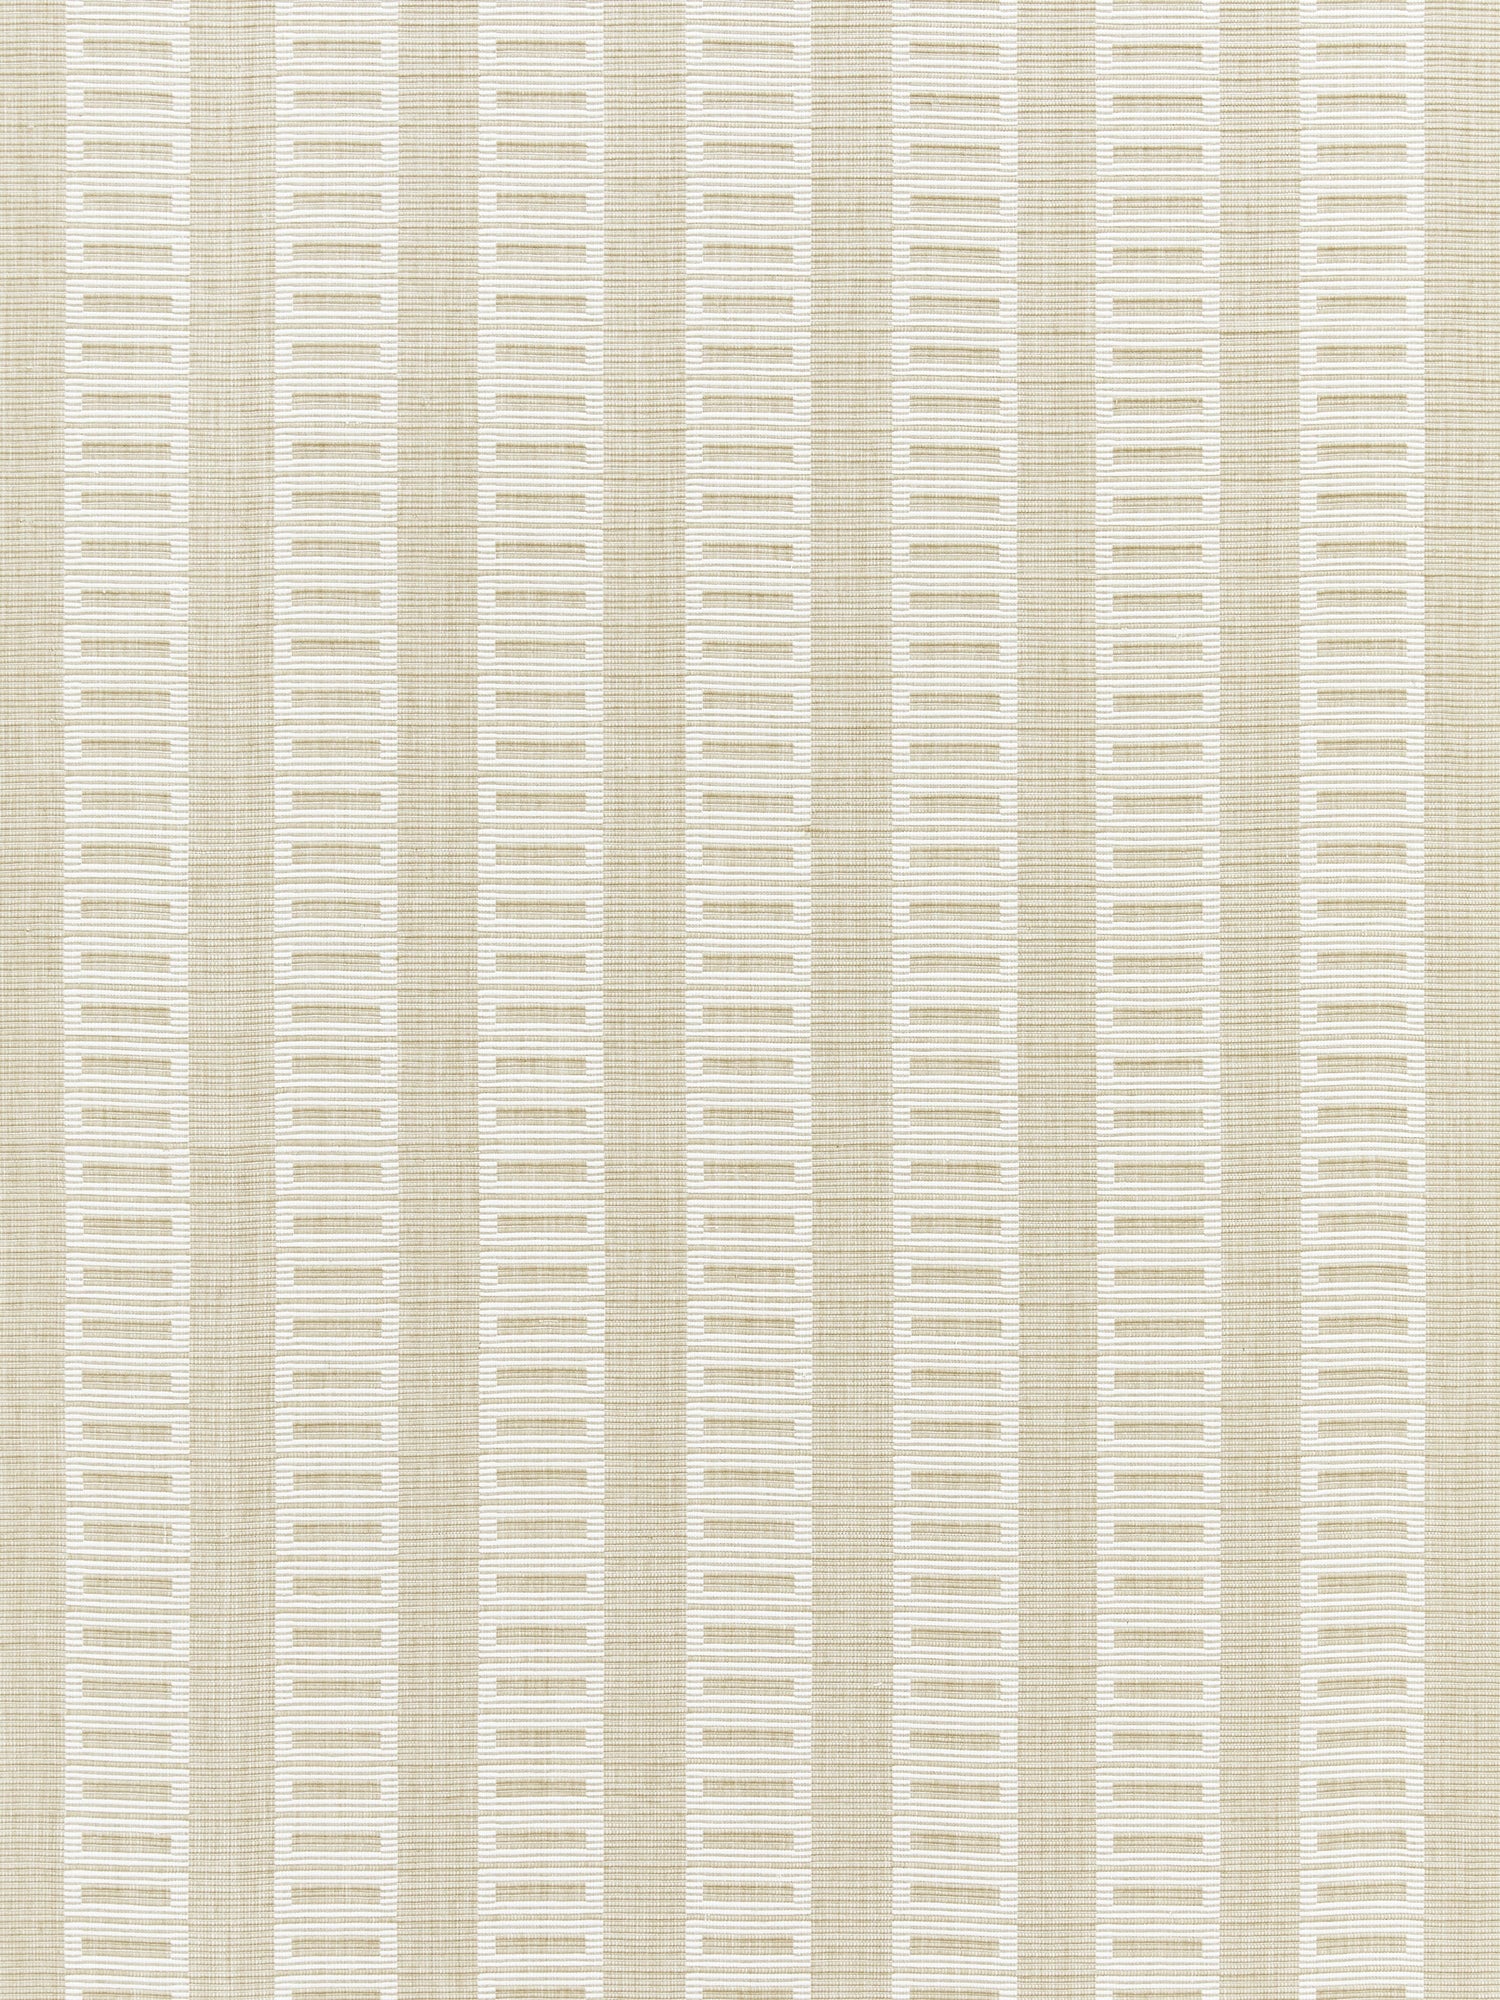 Lark Stripe fabric in sand dollar color - pattern number GW 000127245 - by Scalamandre in the Grey Watkins collection